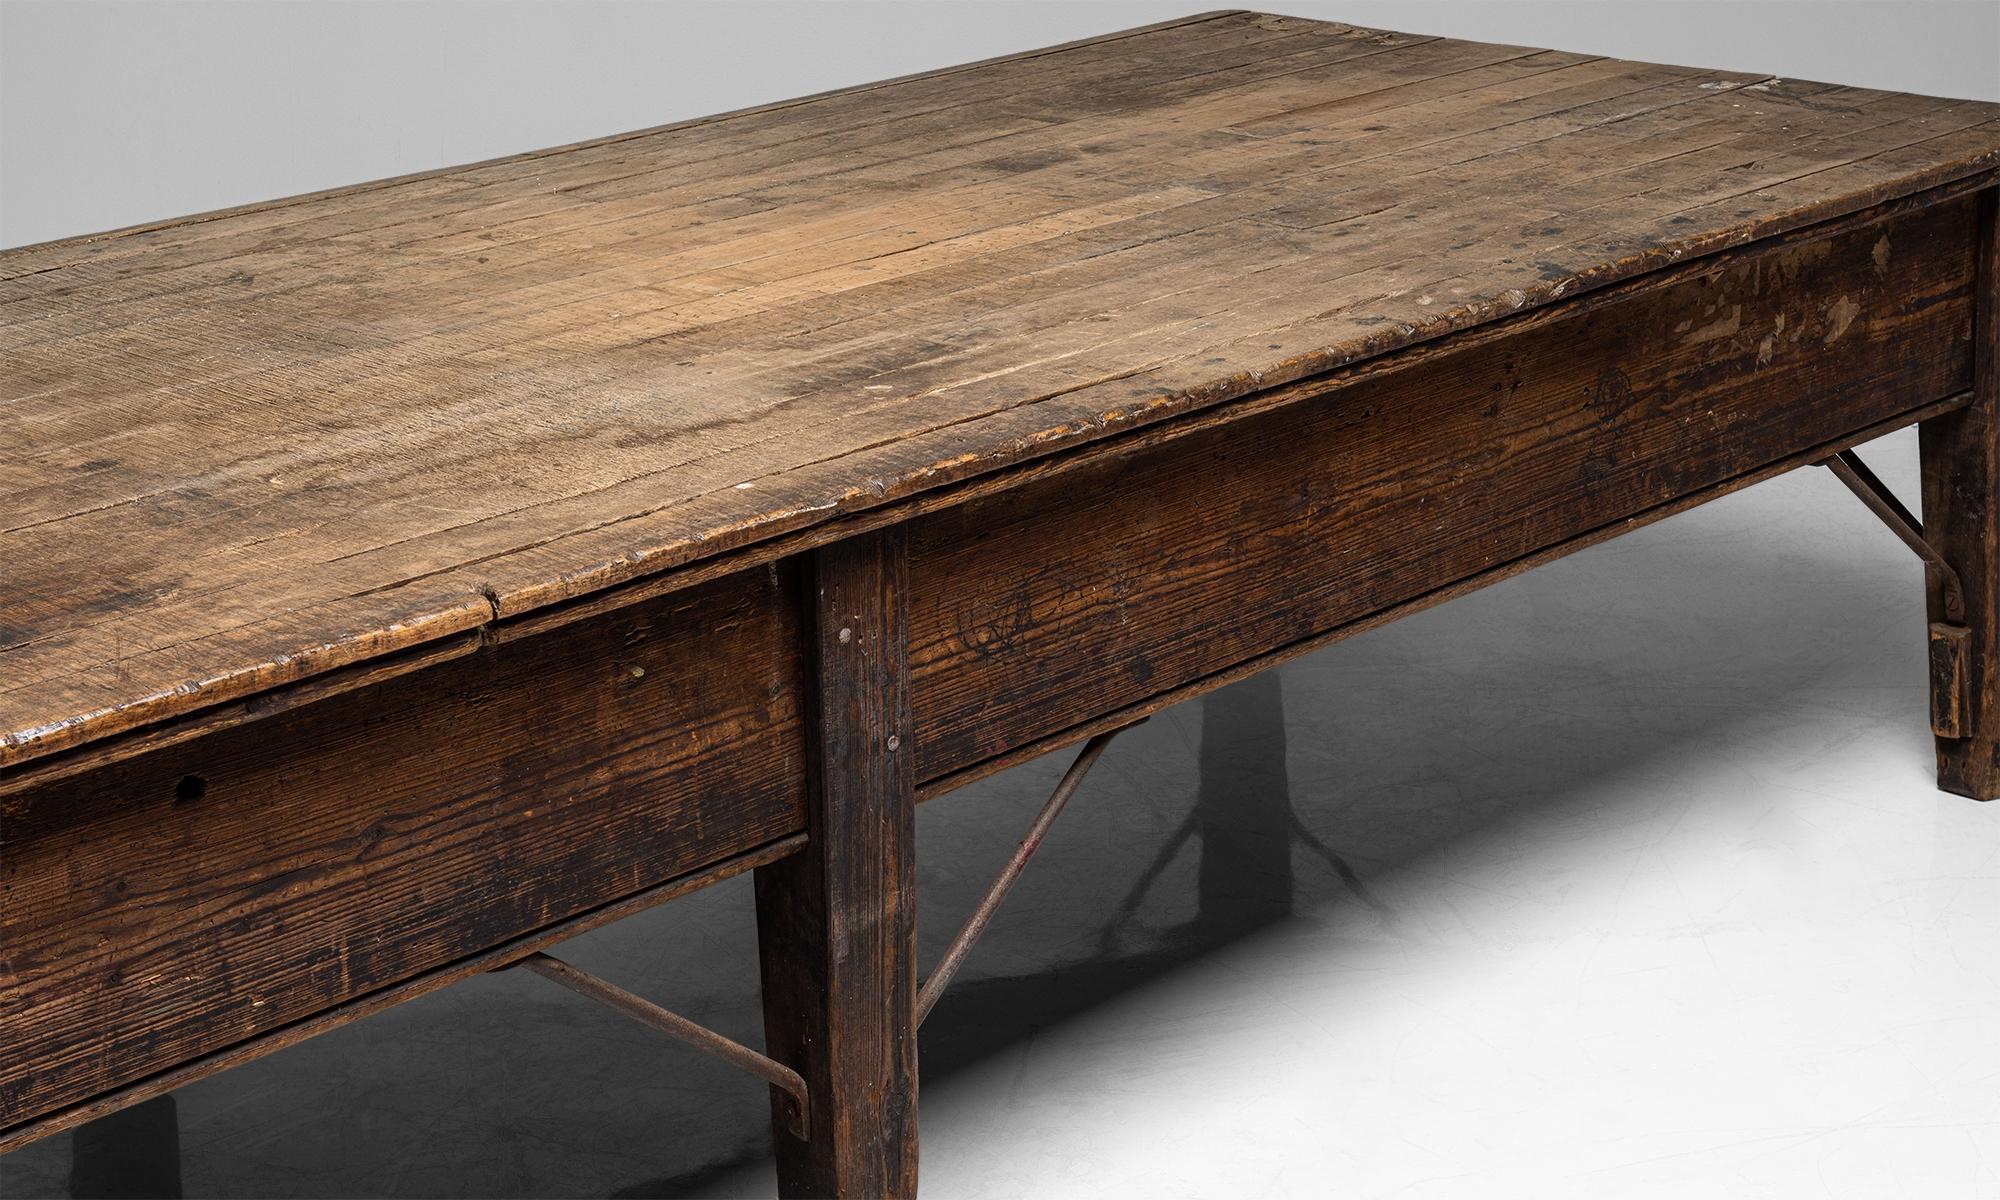 Massive pine mill table
England circa 1900

Pine base with iron bracing and two layer top featuring hardwood tongue-and-groove stips.

Measres: 144.5” W x 51.75” D x 31.5” H.

 